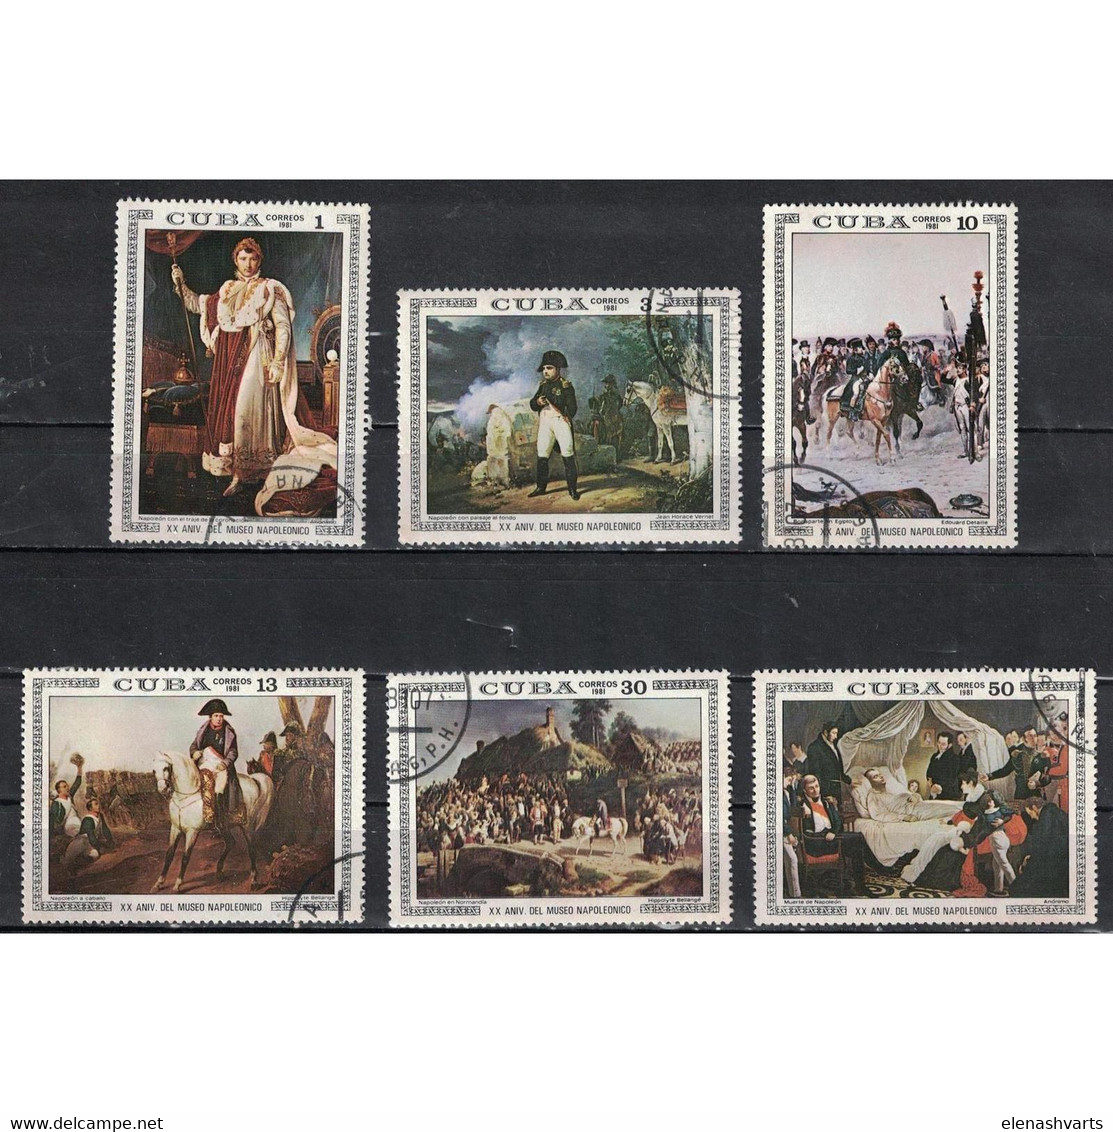 &#128681; Sale - Cuba 1981 The 20th Anniversary Of The Napoleonic Museum  (U)  - Paintings, Napoleon - Used Stamps